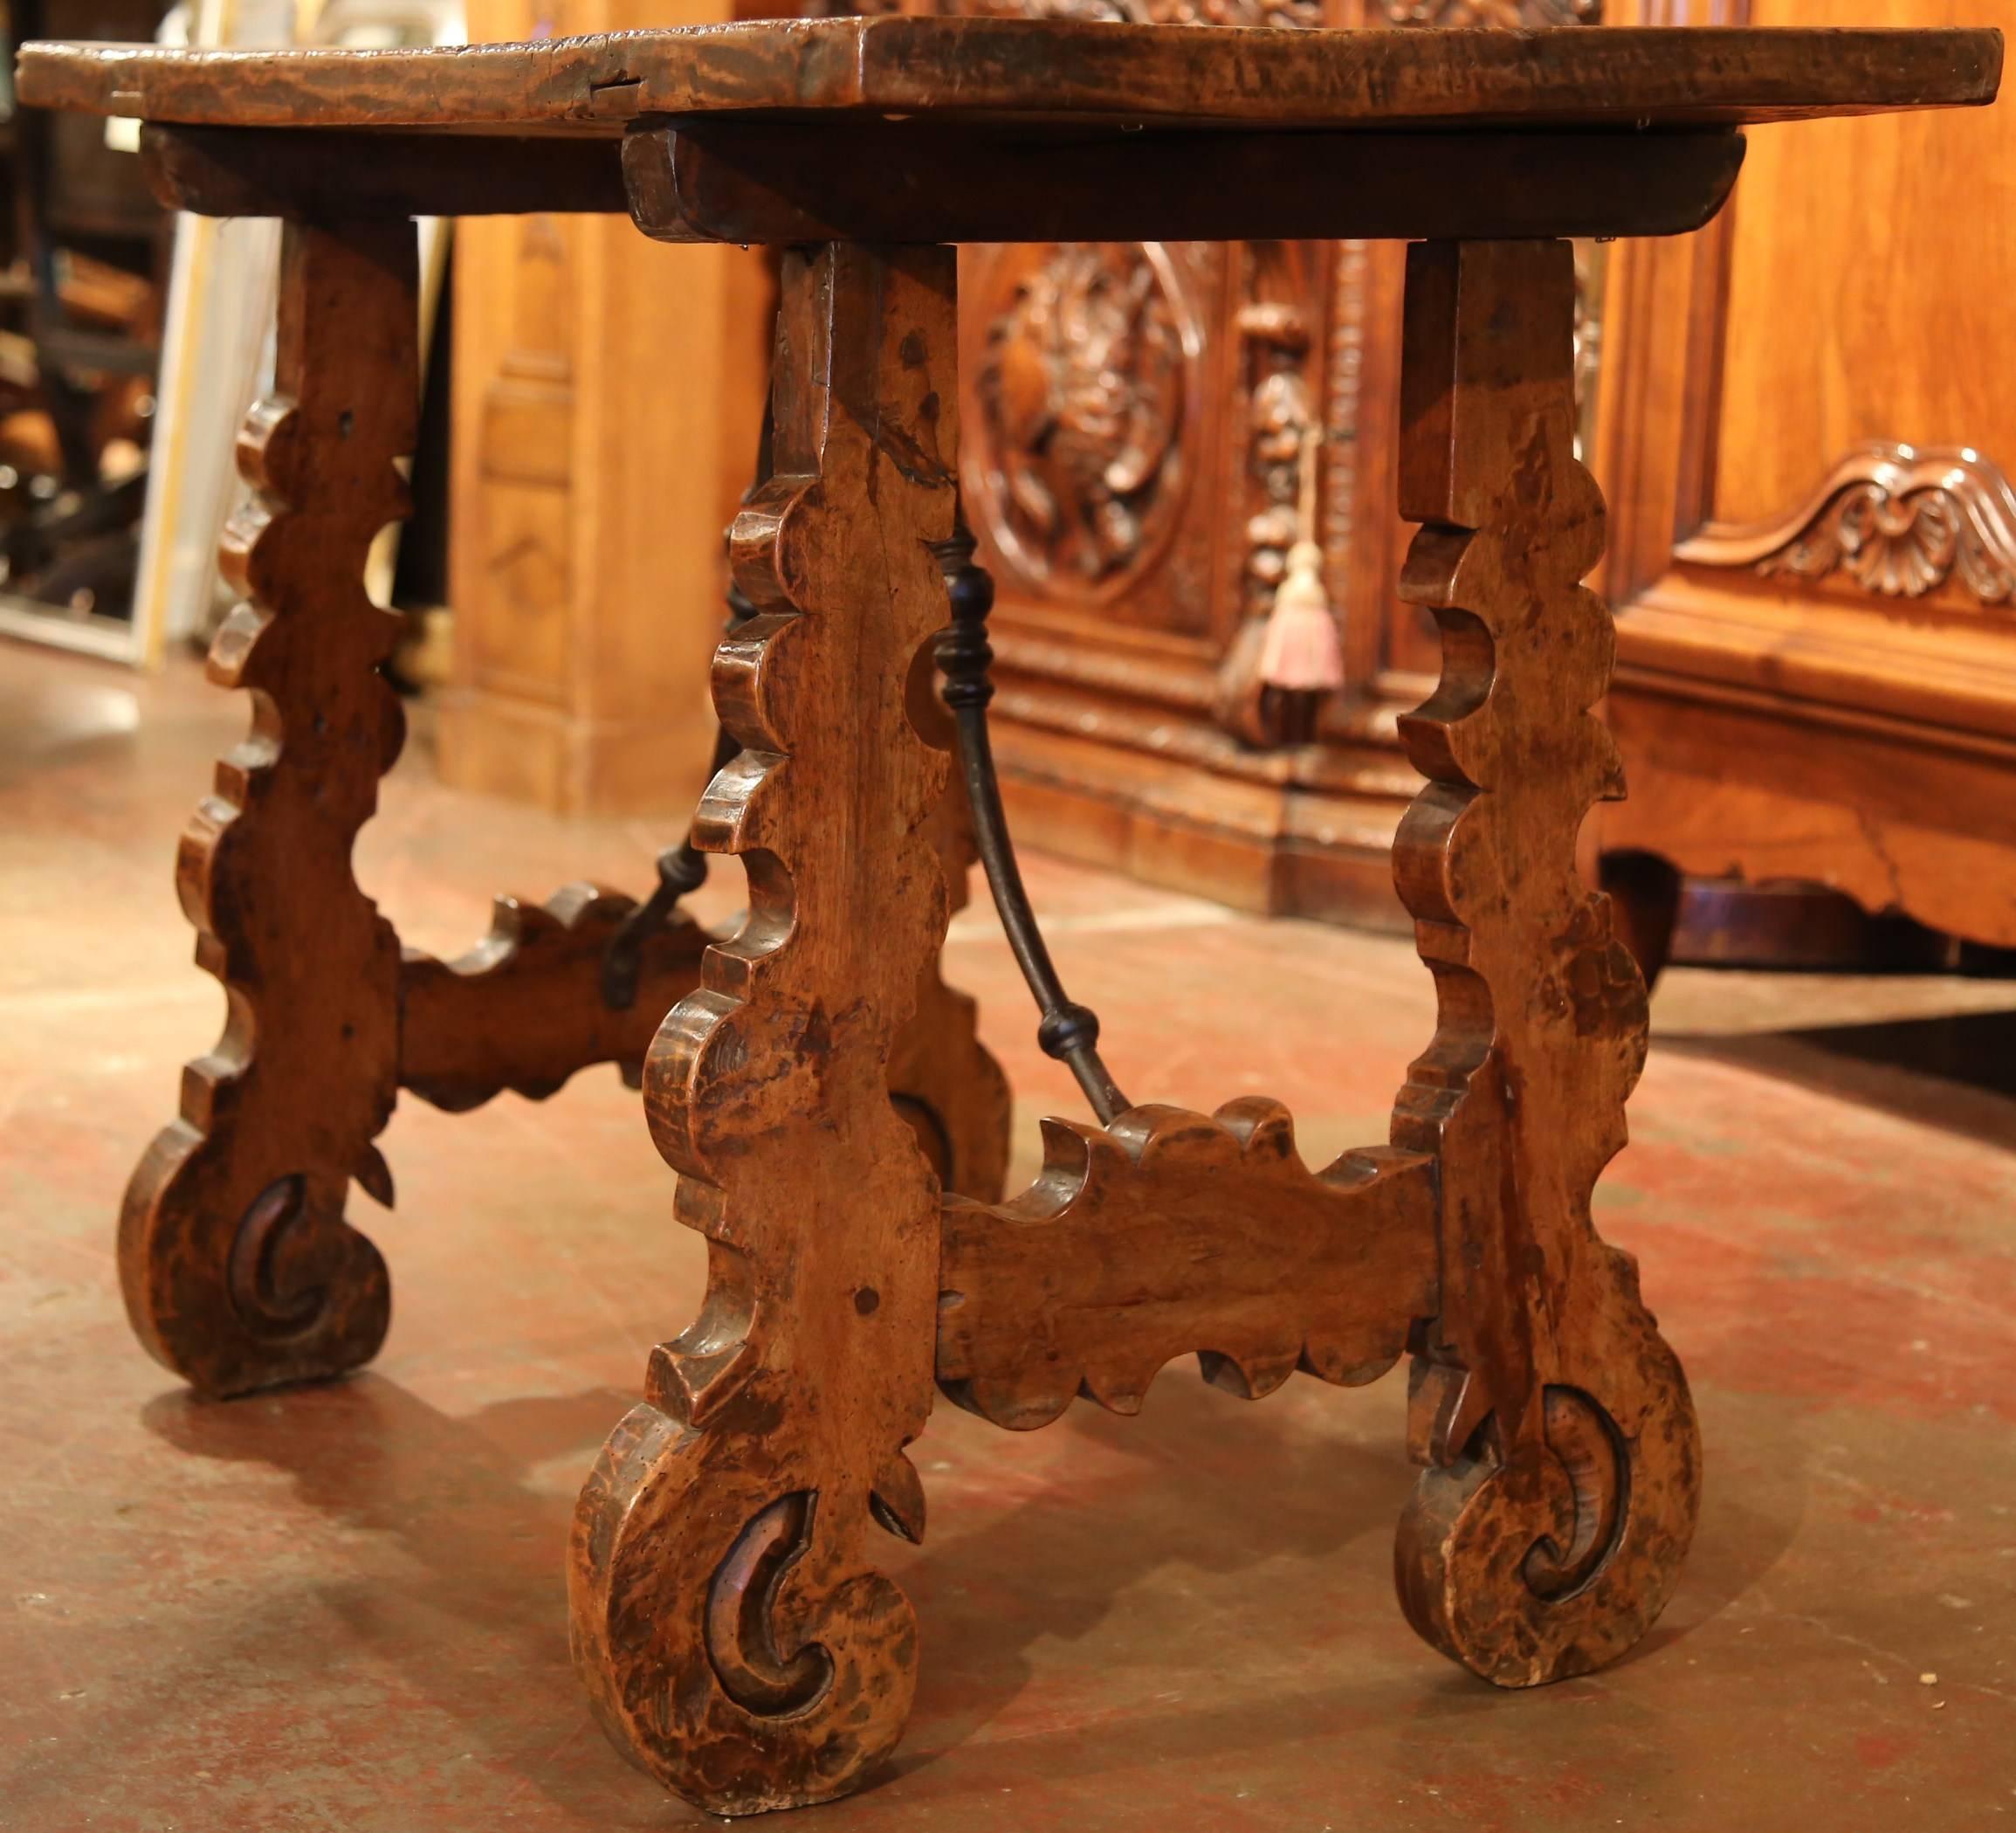 This exquisite antique fruitwood table desk was carved in Spain, circa 1750. The rectangular top is made with a single piece of walnut. Underneath, there are four ornately shaped legs and an original wrought iron stretcher. The rustic, Spanish side